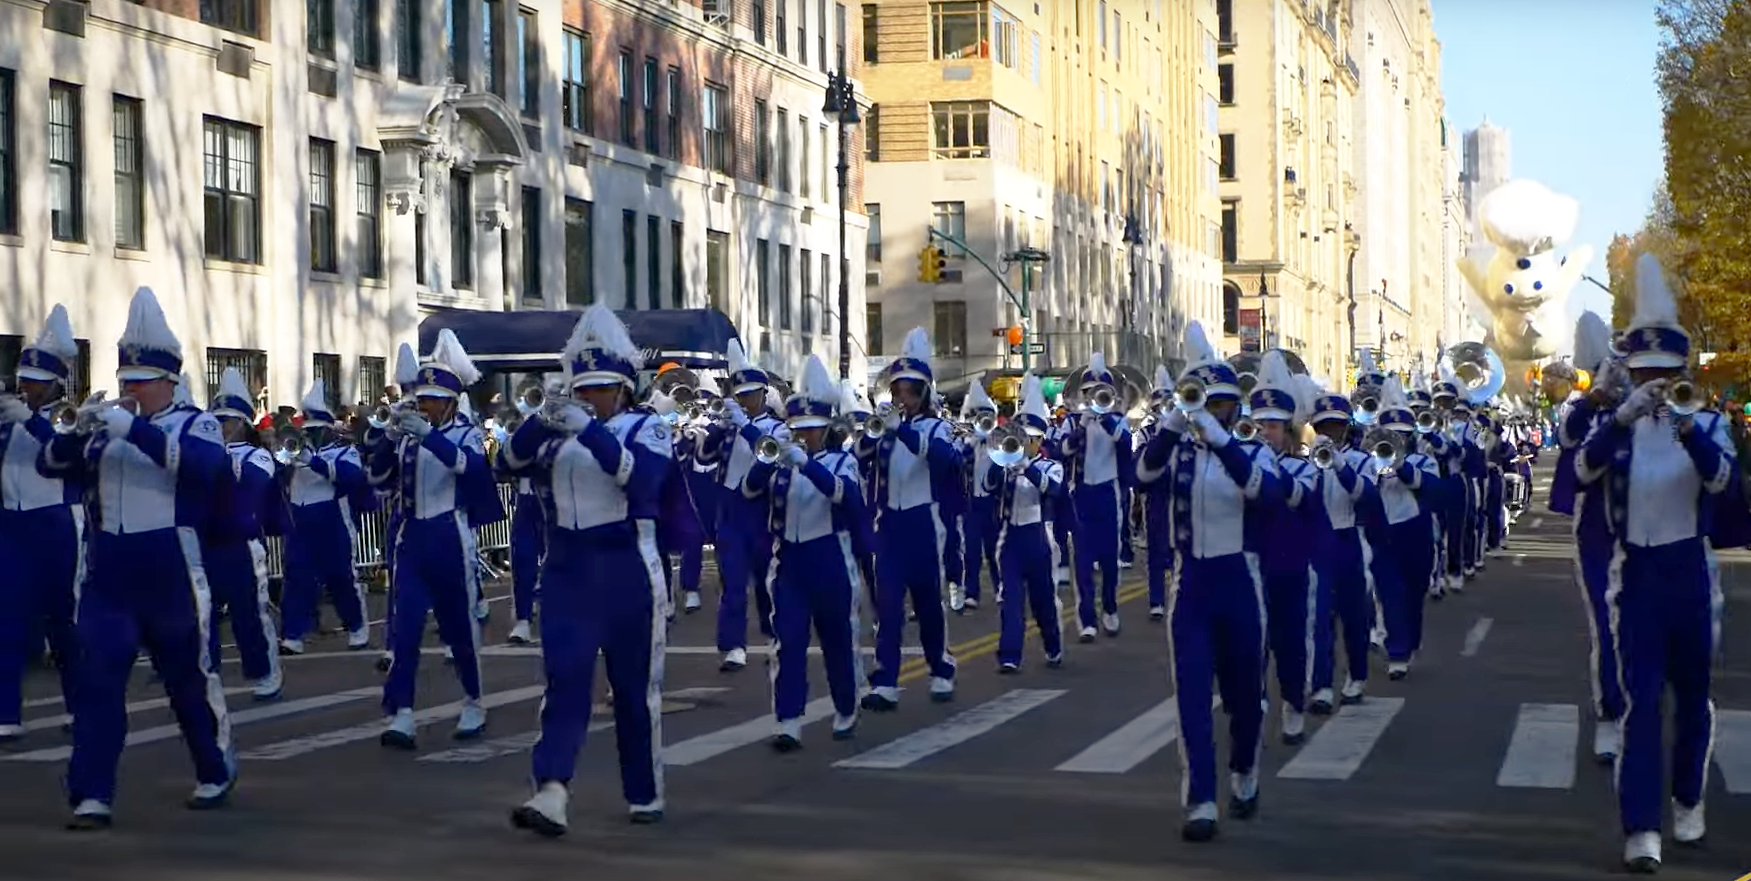 The Benedict College Marching Tigers Band of Distinction performed in the 2022 Macy's Thanksgiving Day parade.